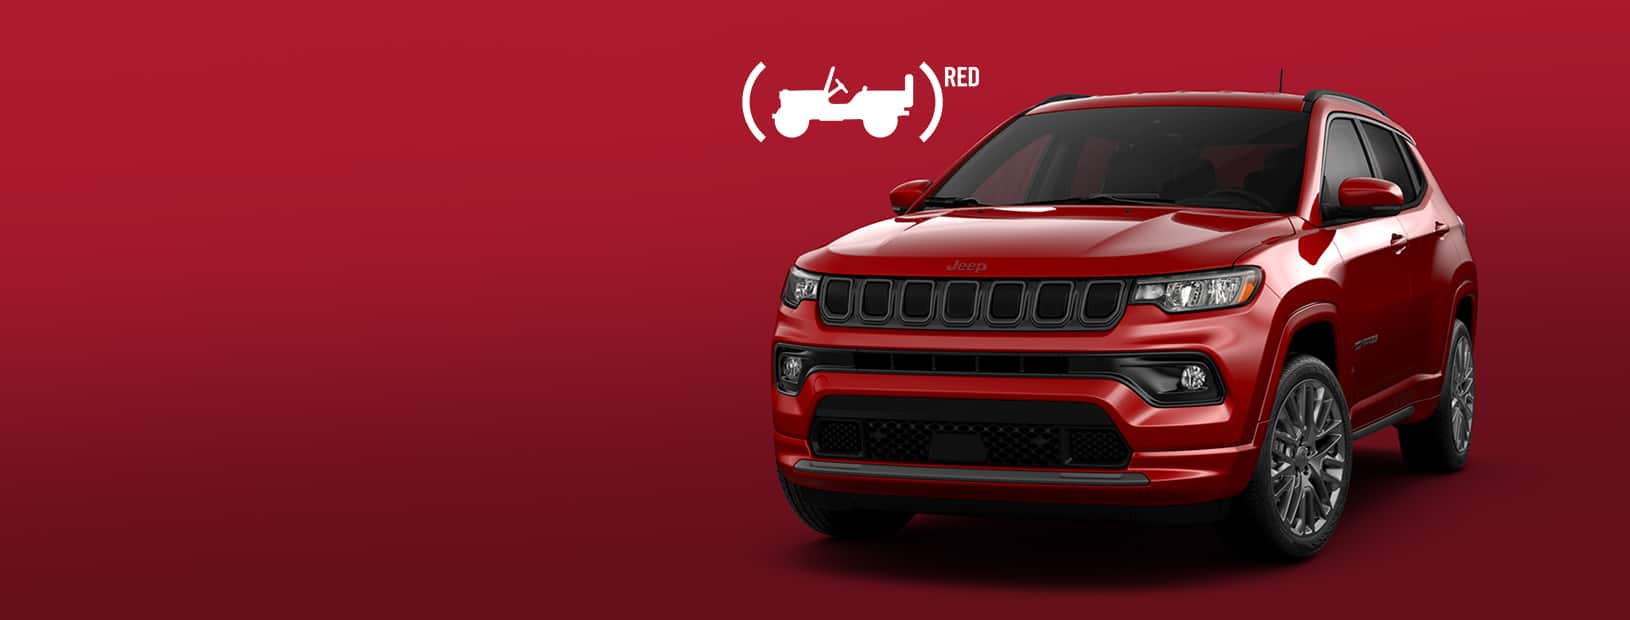 The Jeep Red Edition logo.